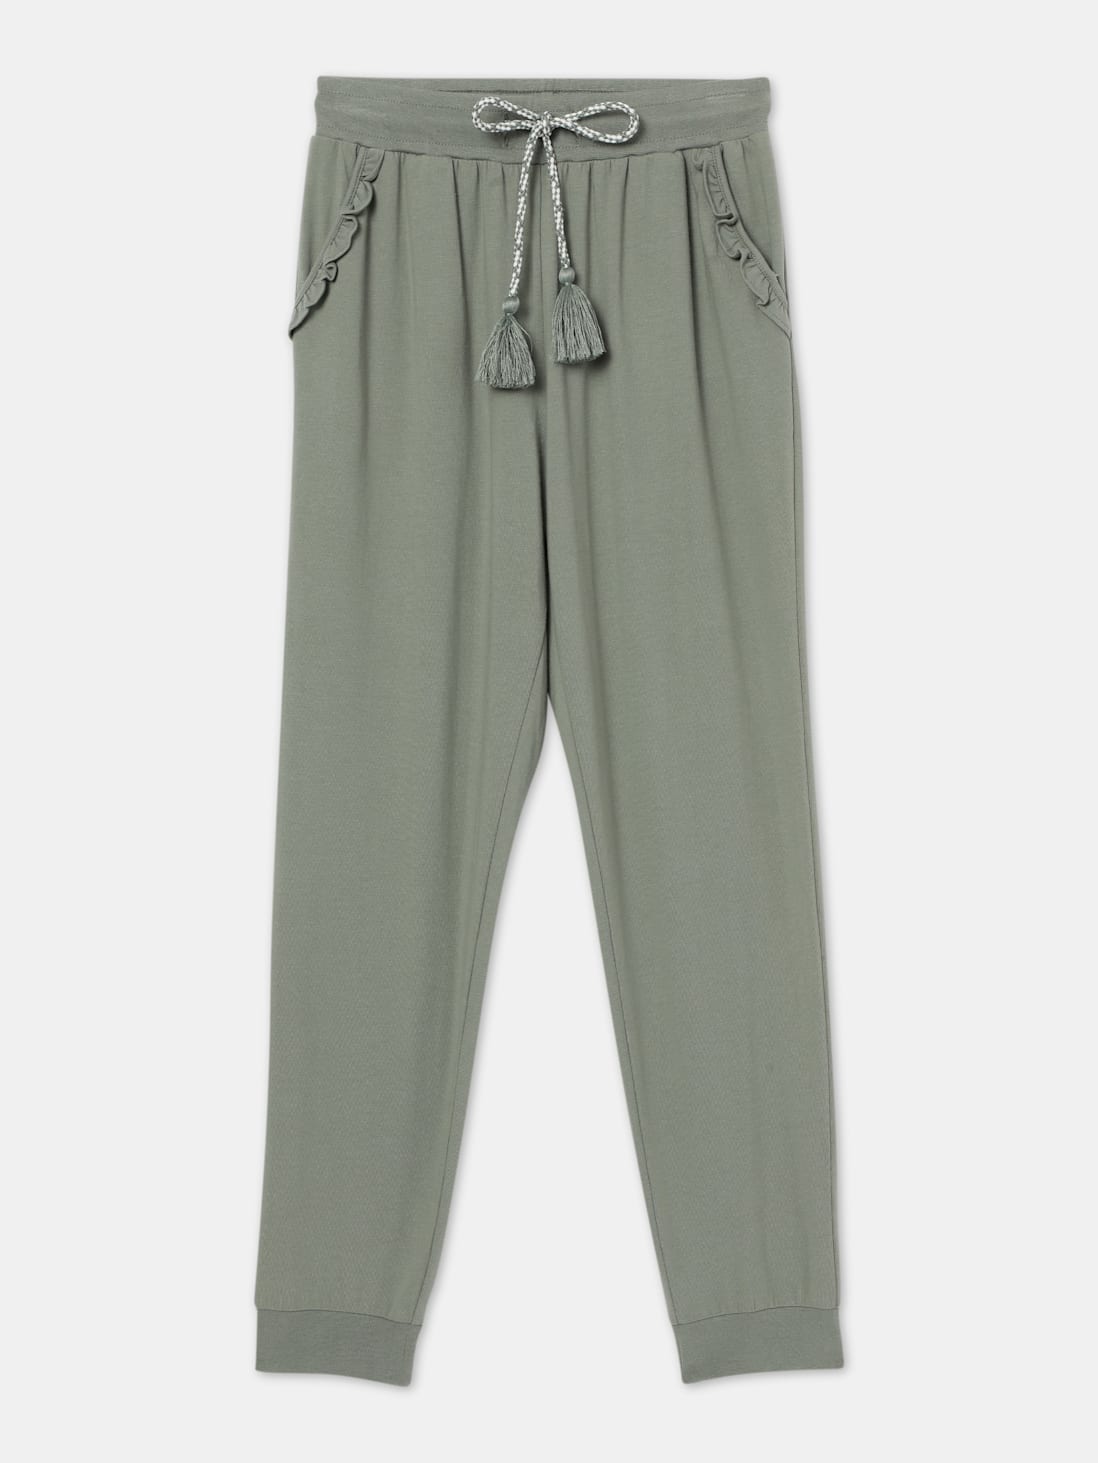 Shop Dark Olive Green Joggers for Men Online at Great Price